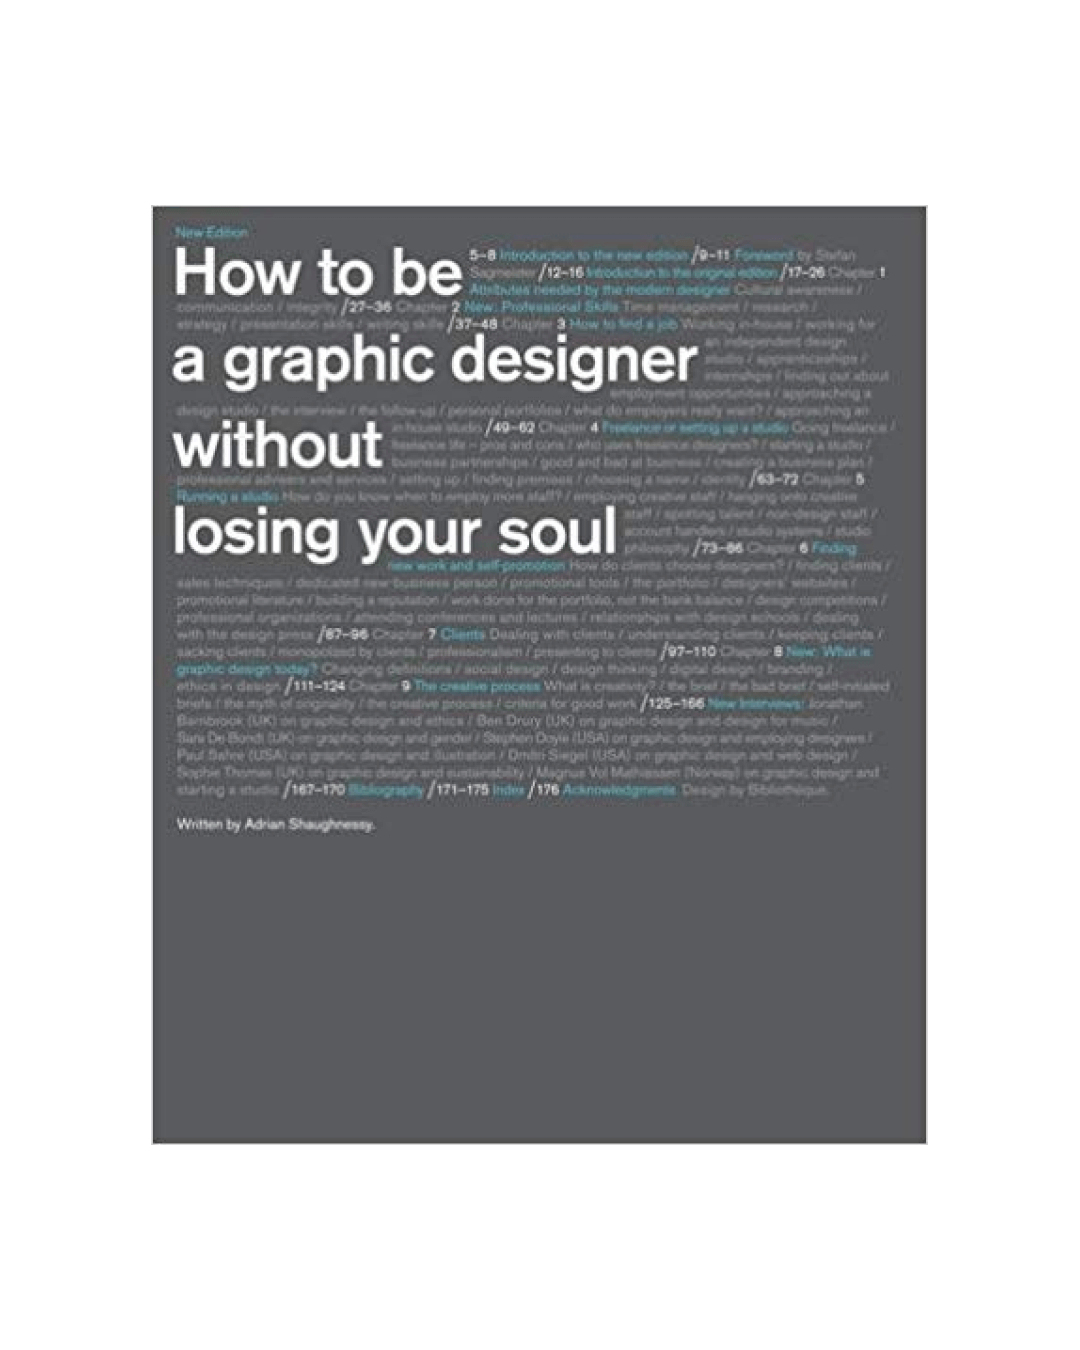 How to be a Graphic Designer Without Losing Your Soul book cover